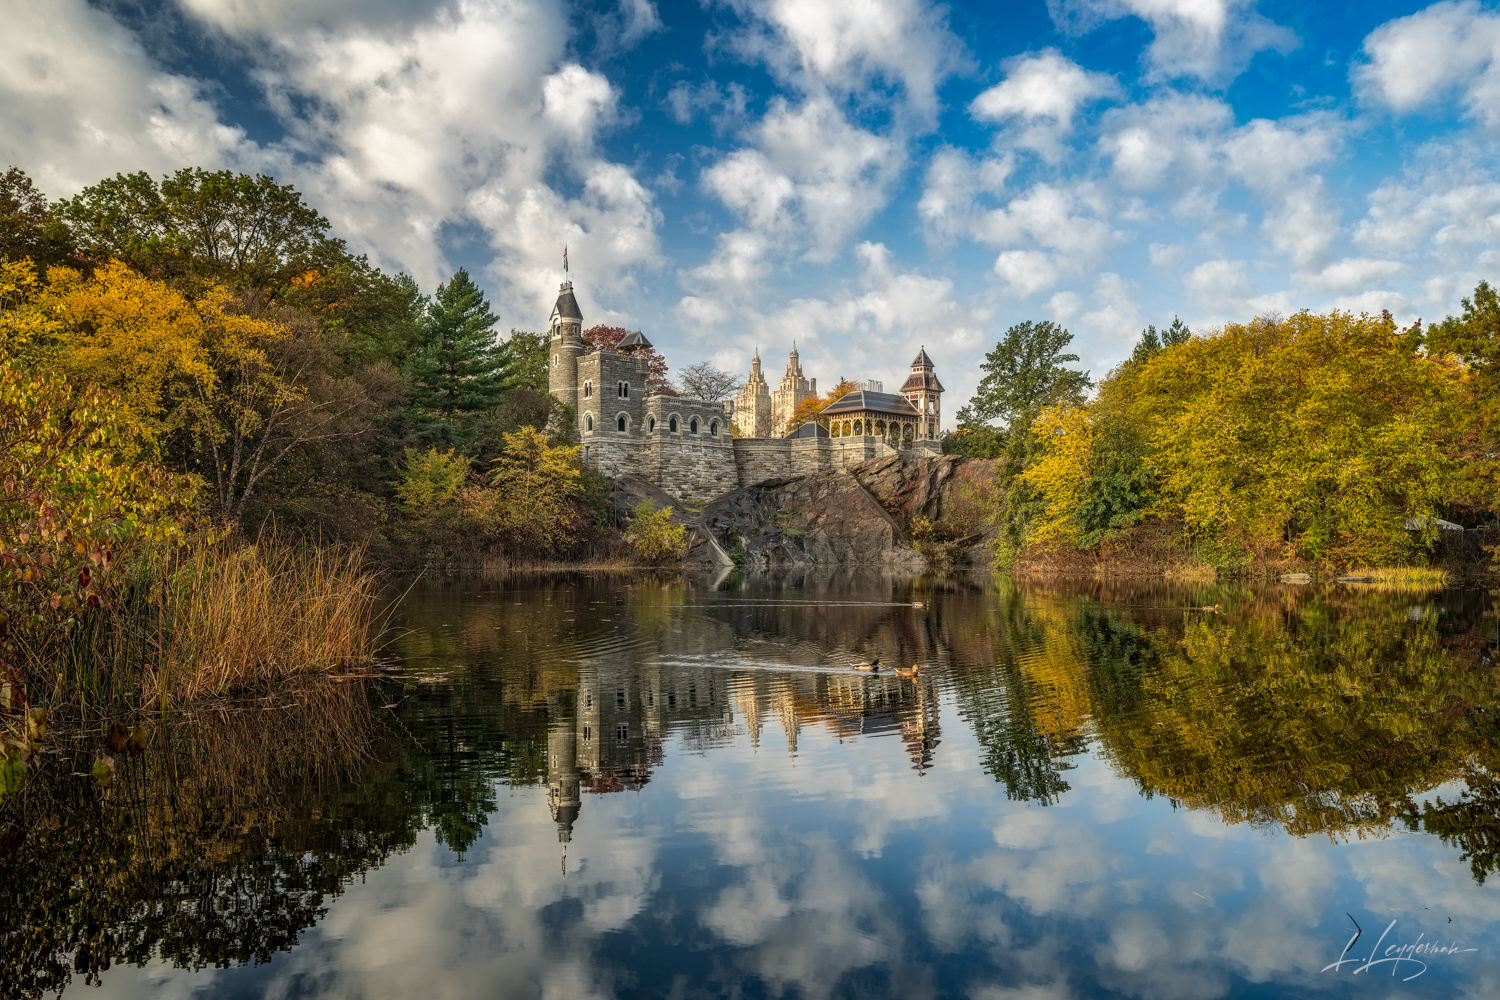 Standing proud against a backdrop of changing leaves and dynamic skies, Belvedere Castle offers a moment of historic reverie...